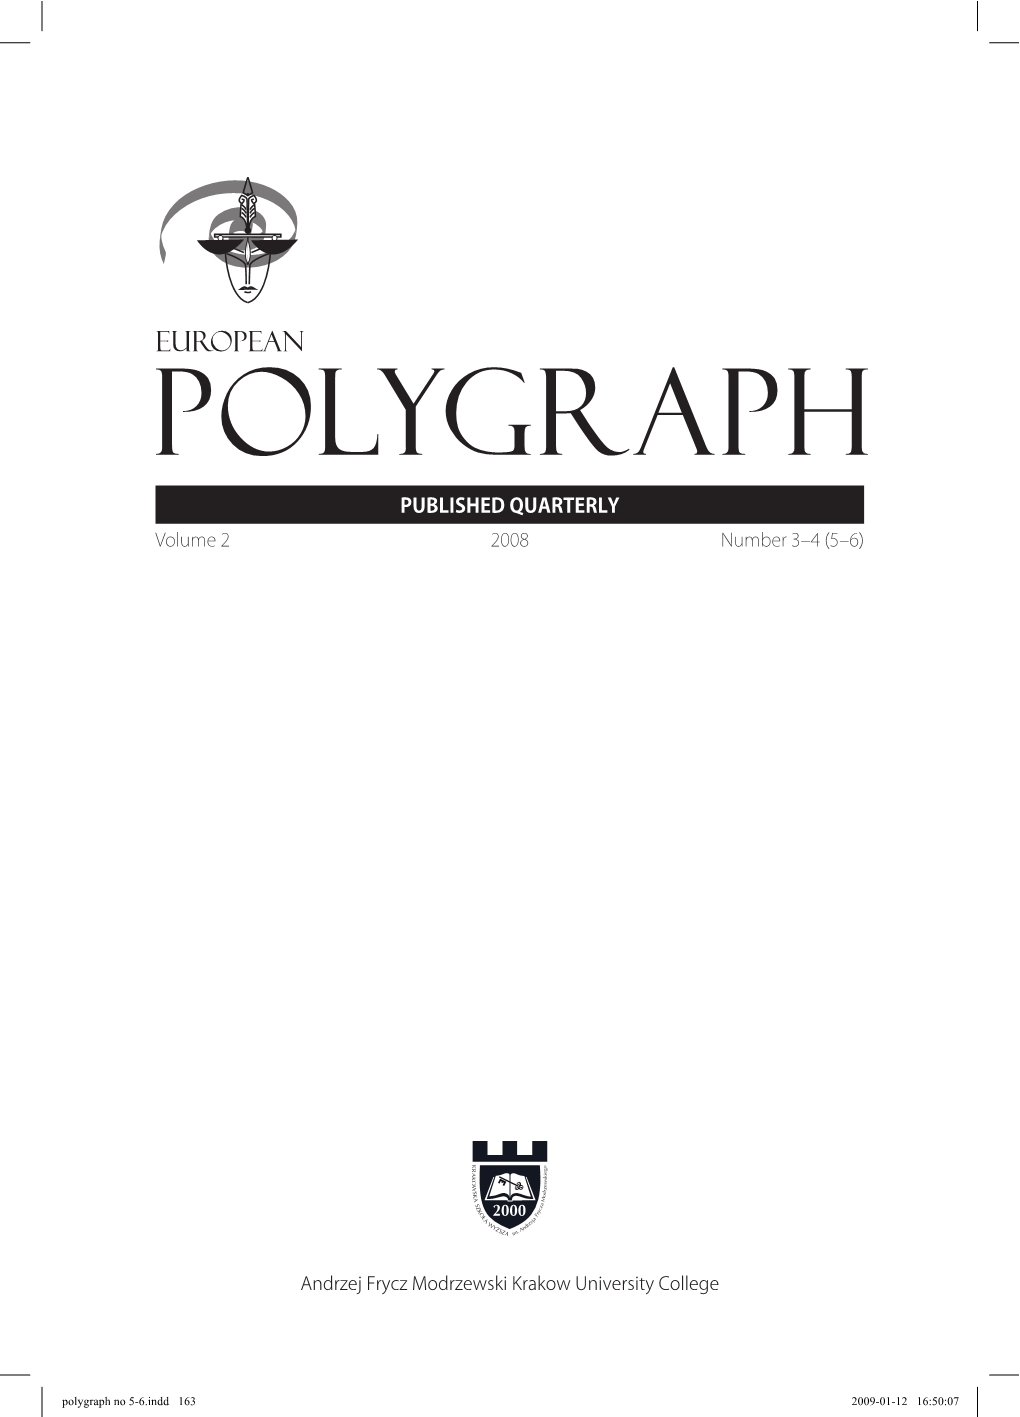 Academic Seminar “The Usage of the Polygraph in Criminal Examination as well as in the Psychophysiological Testing of Staff” Cover Image